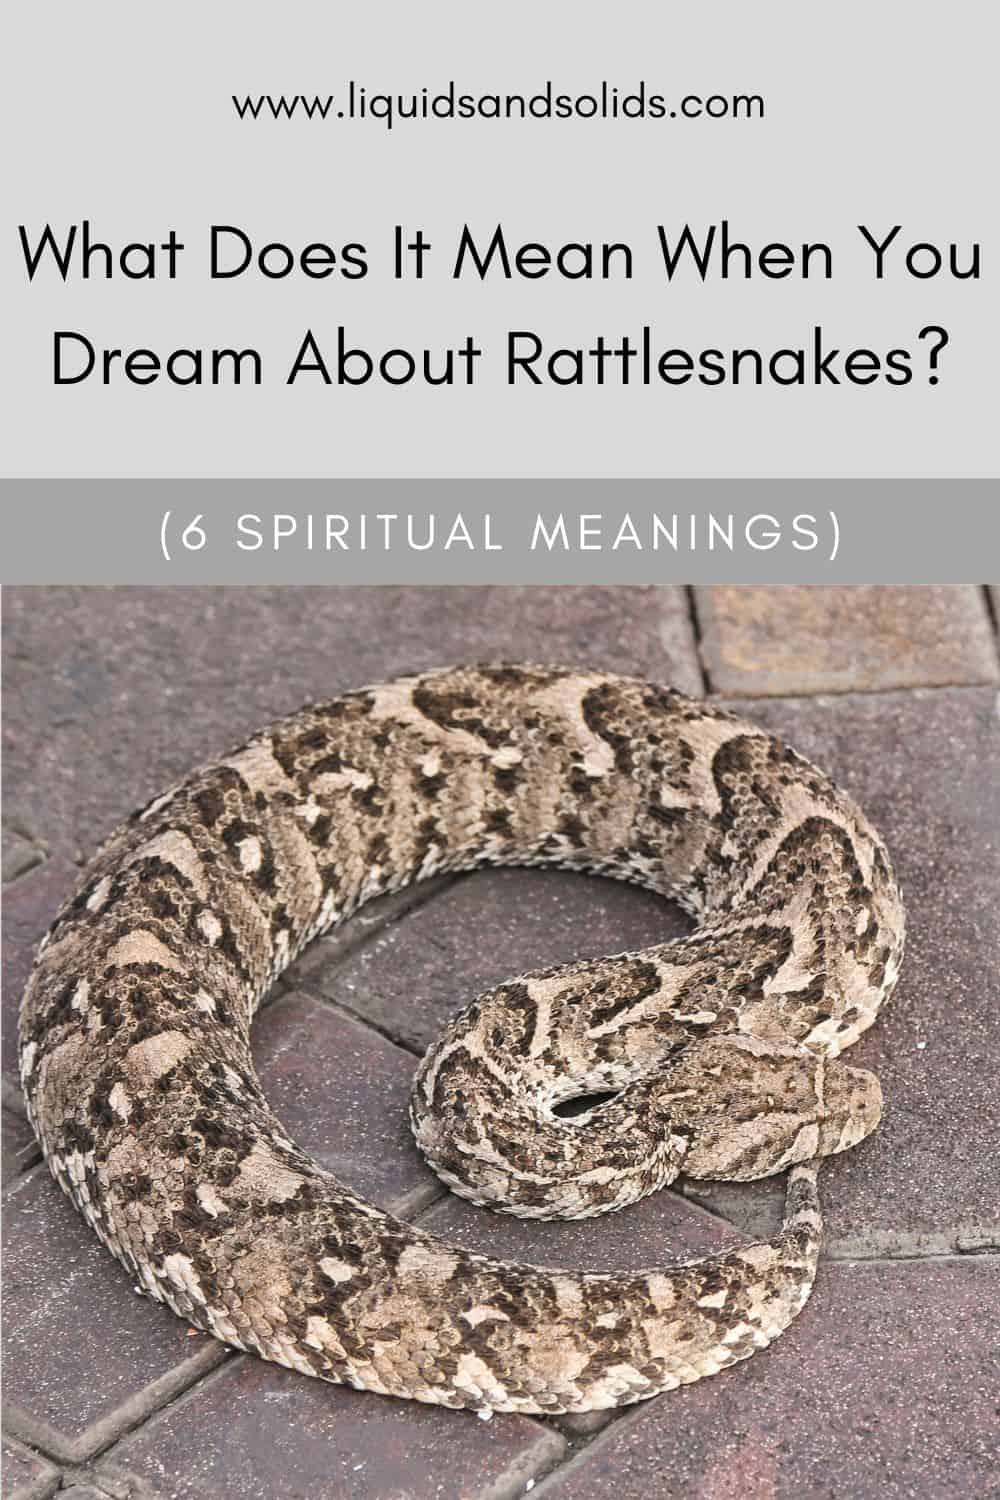 What Does It Mean When You Dream About Rattlesnakes? (6 Spiritual Meanings)